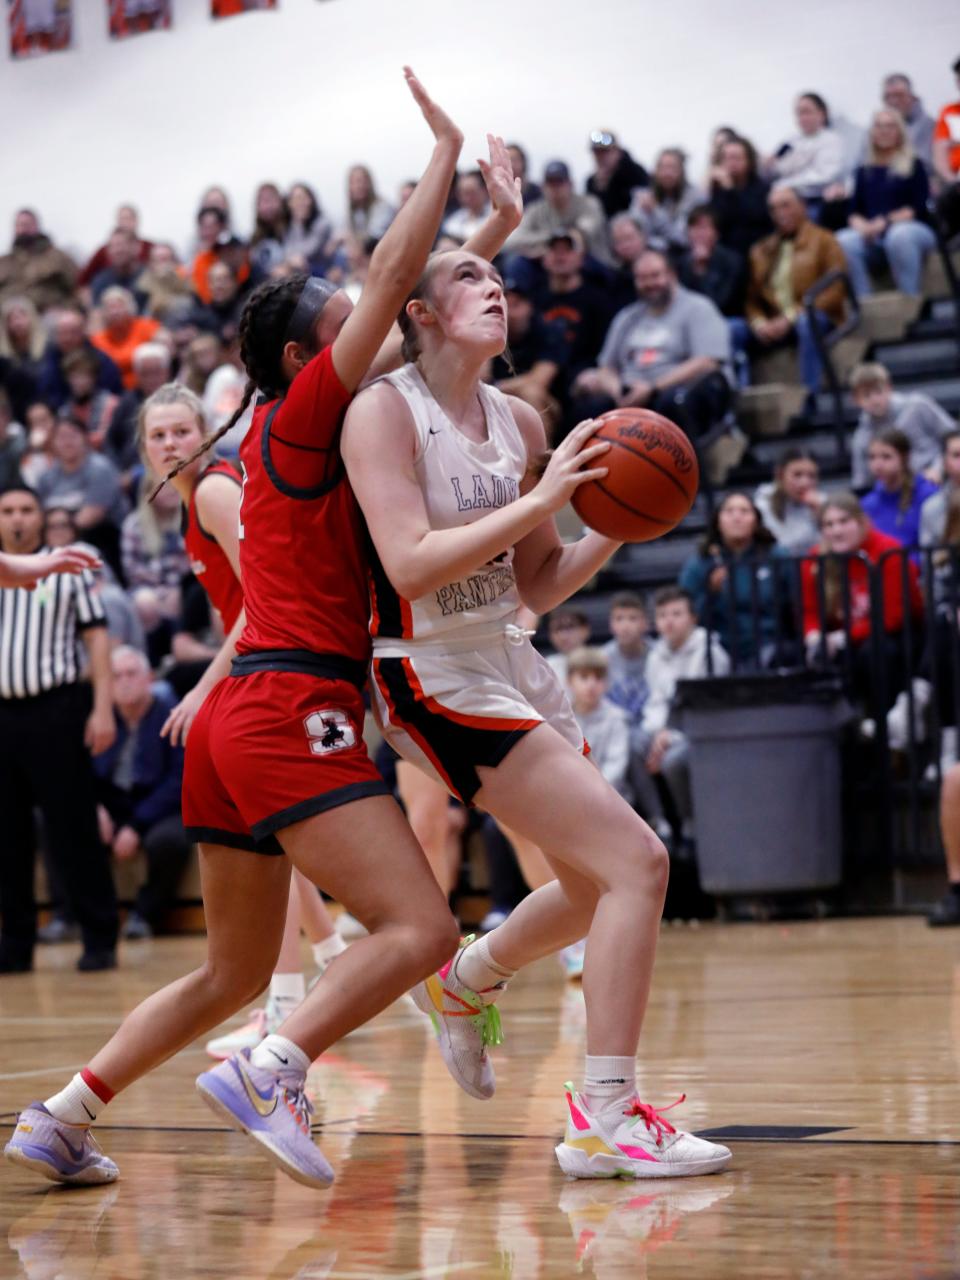 New Lexington's Abbie Wilson goes in for a shot against Sheridan's Halle Warner in last year's contest. Wilson is one of three returning starters for the Panthers, who aim to defend their MVL Small School title streak.